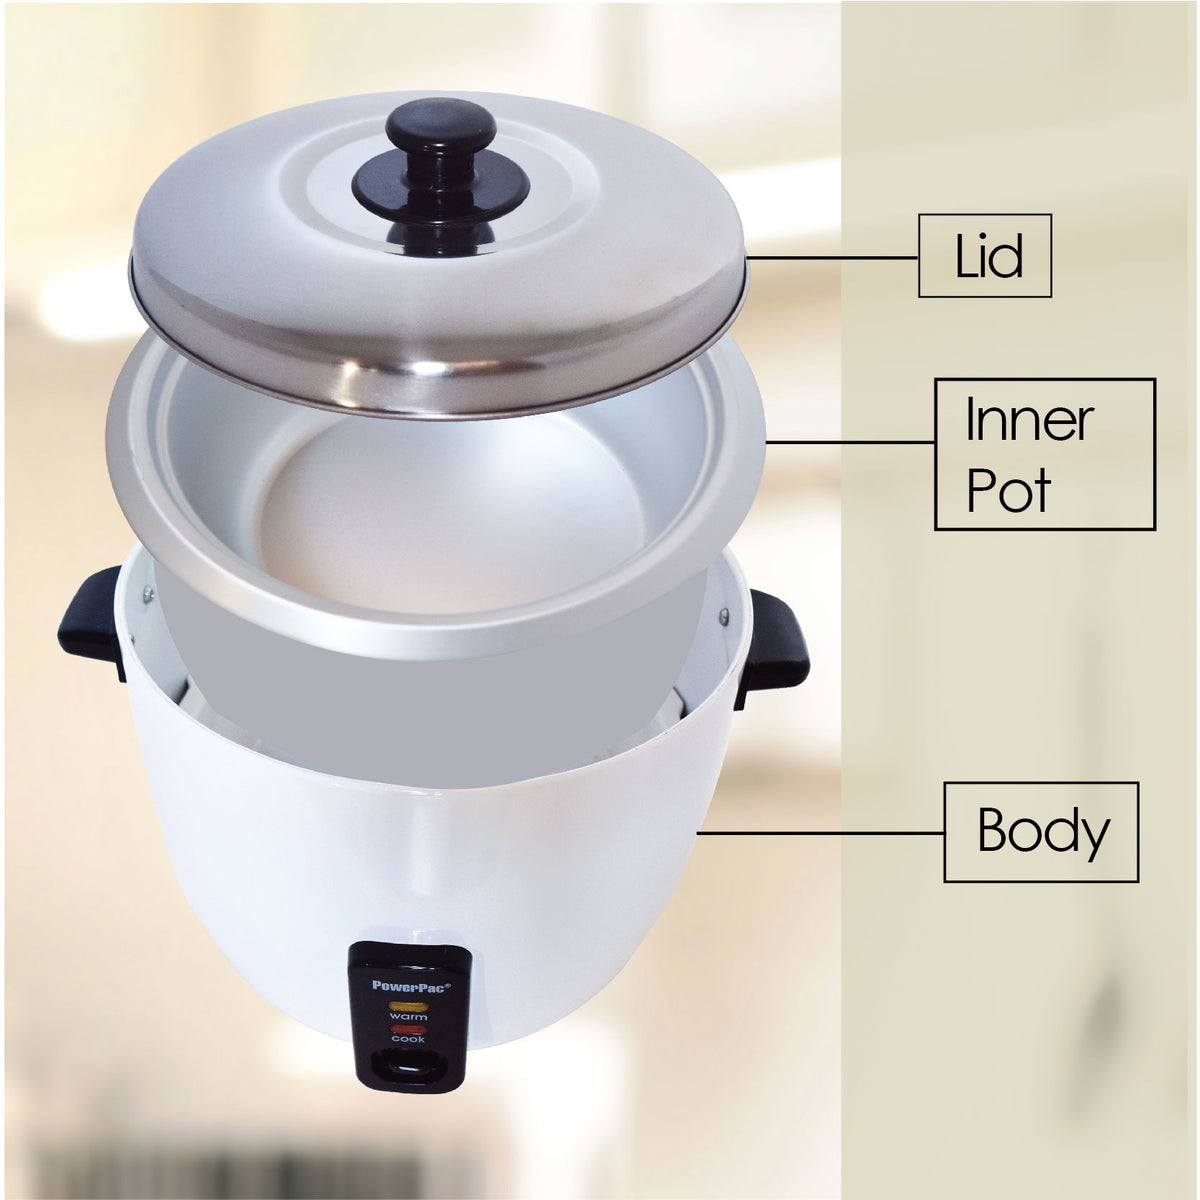 2.8L Rice Cooker with Aluminium Inner Pot (PPRC10) - PowerPacSG